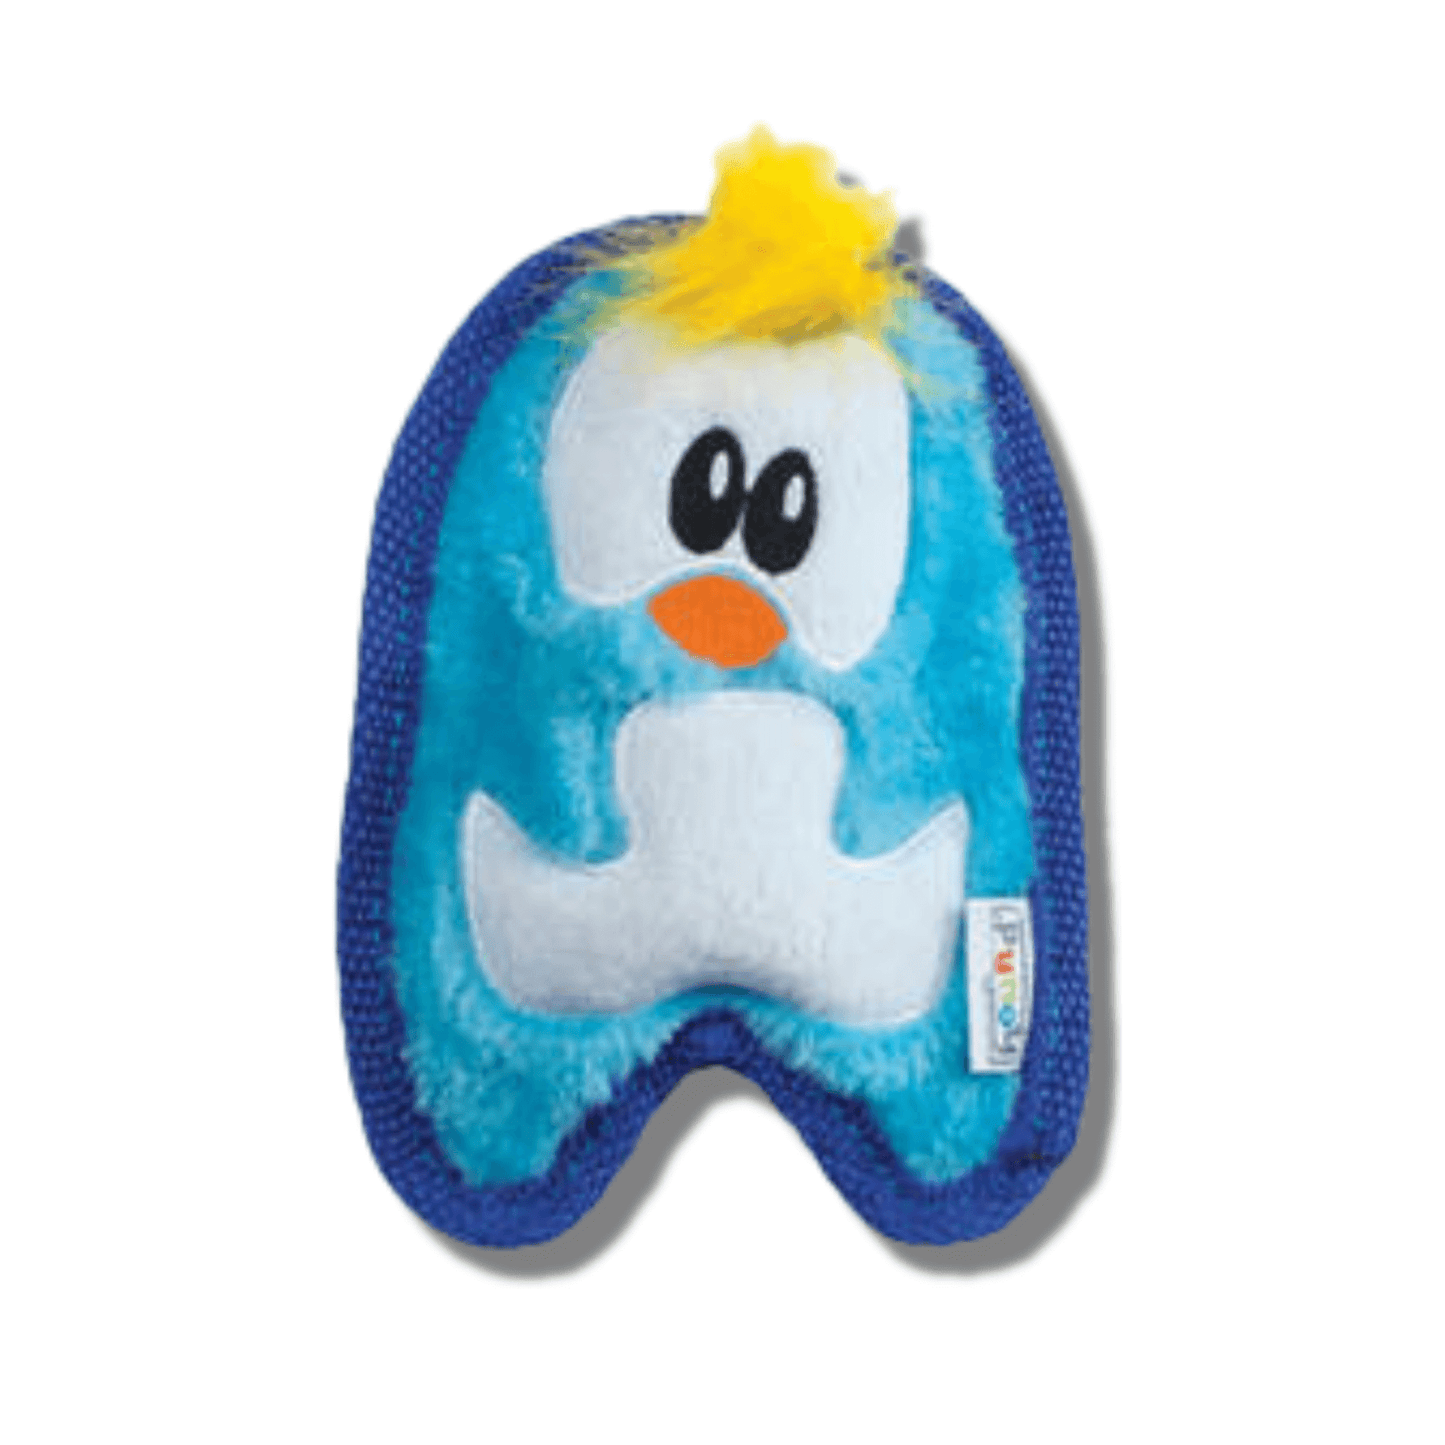 Penguin invincible and durable dog toy for ruffer play, let's pawty